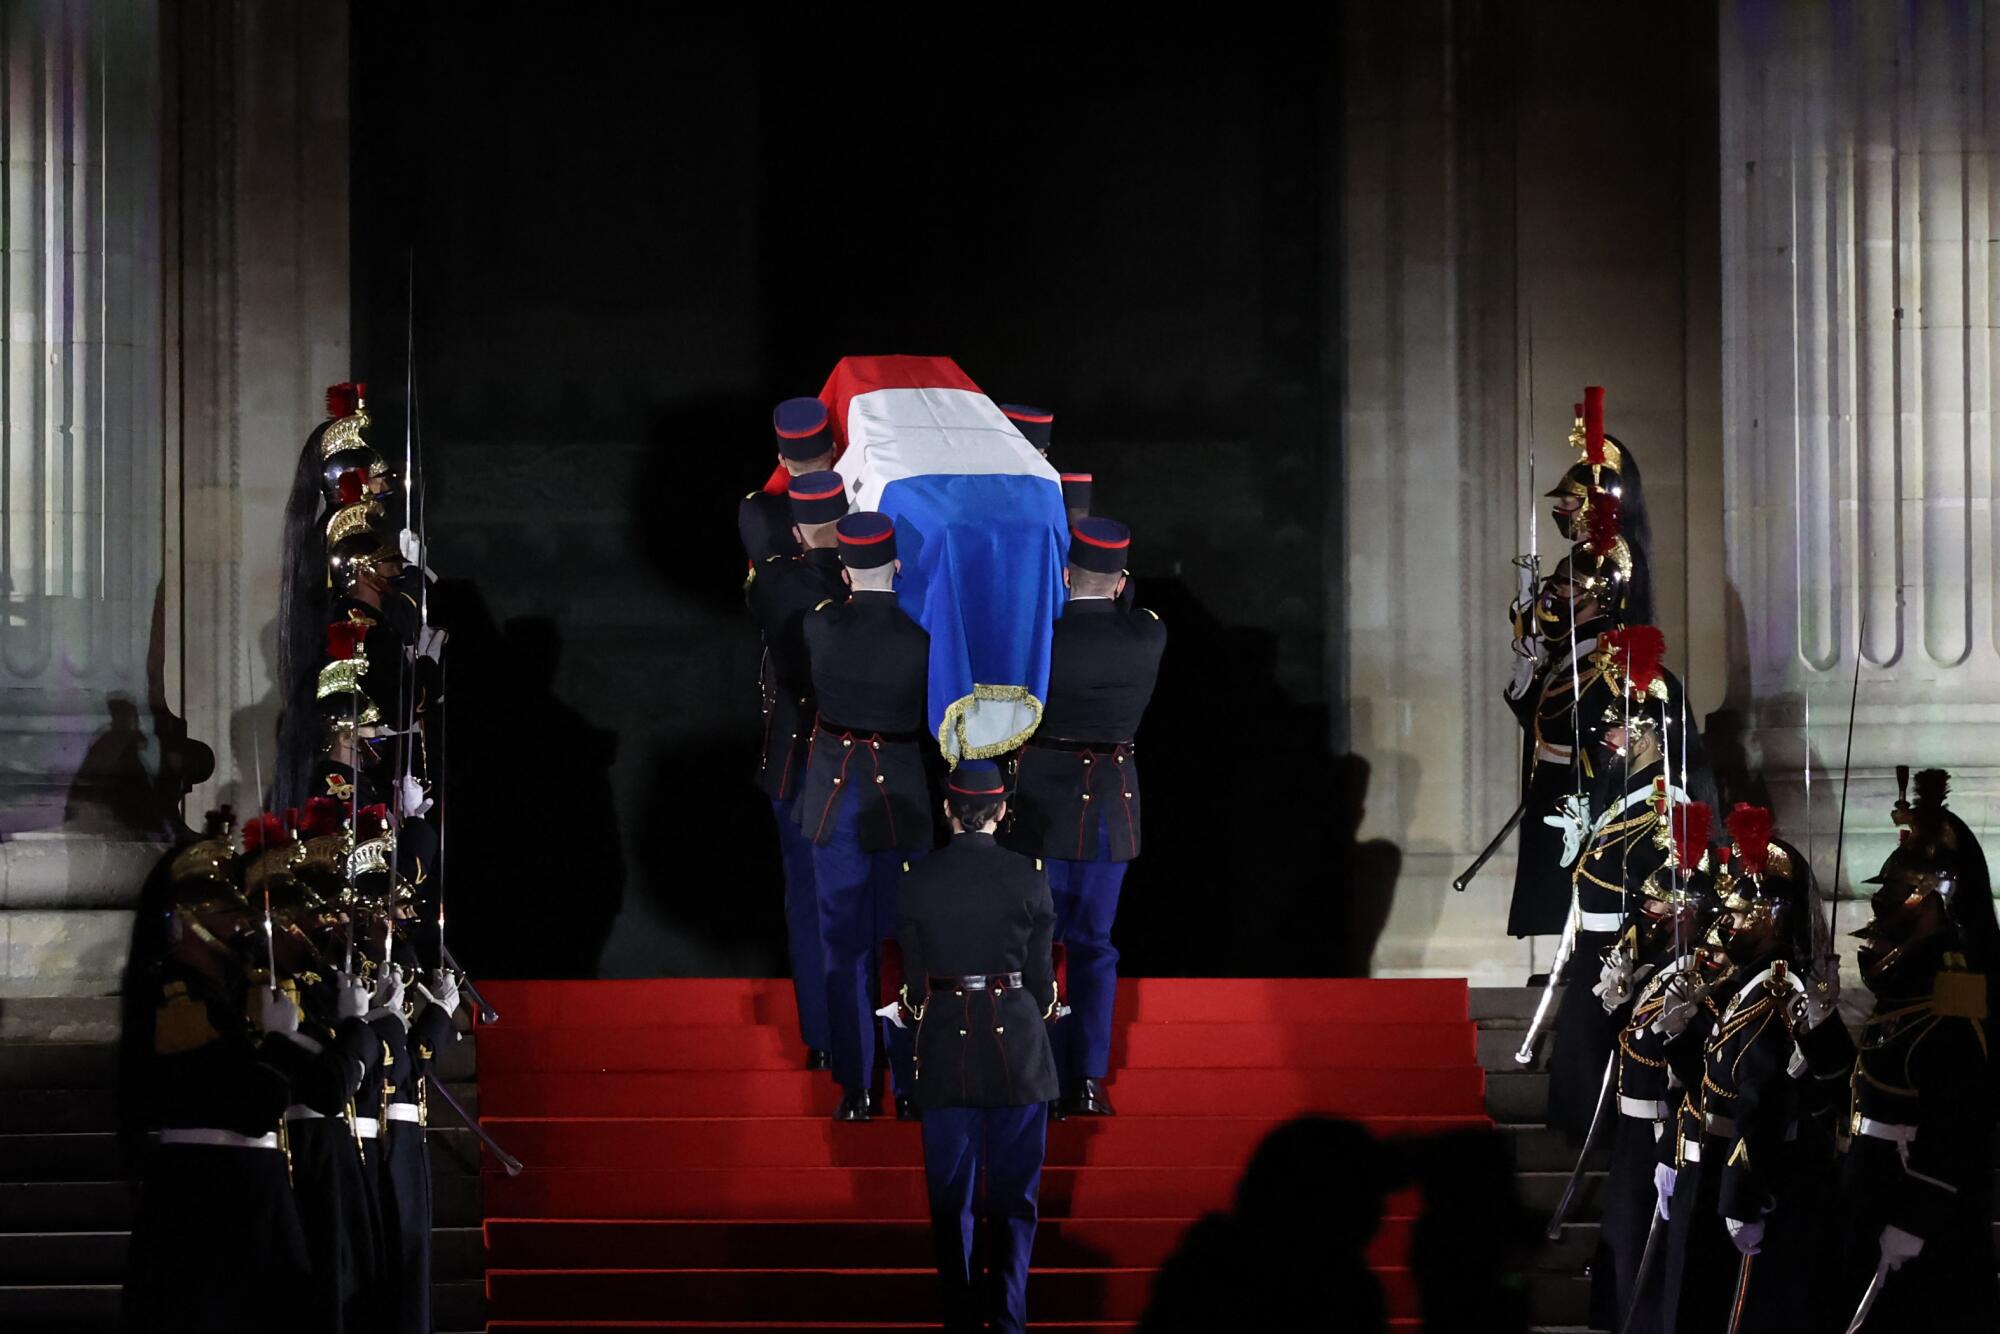 The cenotaph of Josephine Baker enters the French Pantheon.